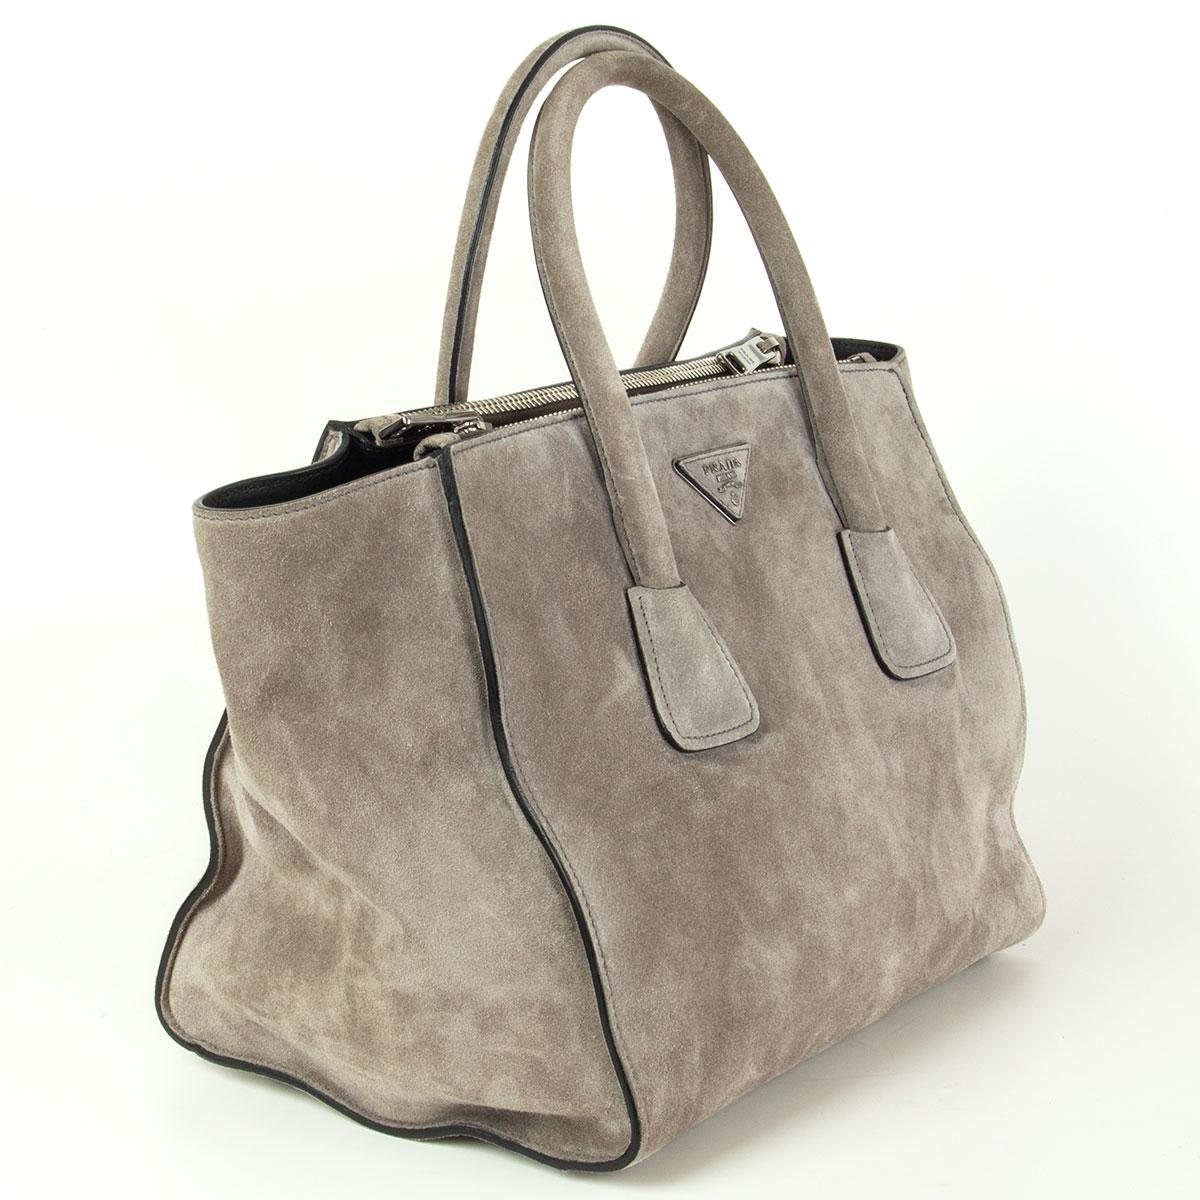 Prada Twin Pocket tote in grey suede featuring silver-tone hardware. Opens with a push-button and is lined in smooth black lambskin with two extra large zip pockets on the side, a small zip pocket against the back and a open pocket against the